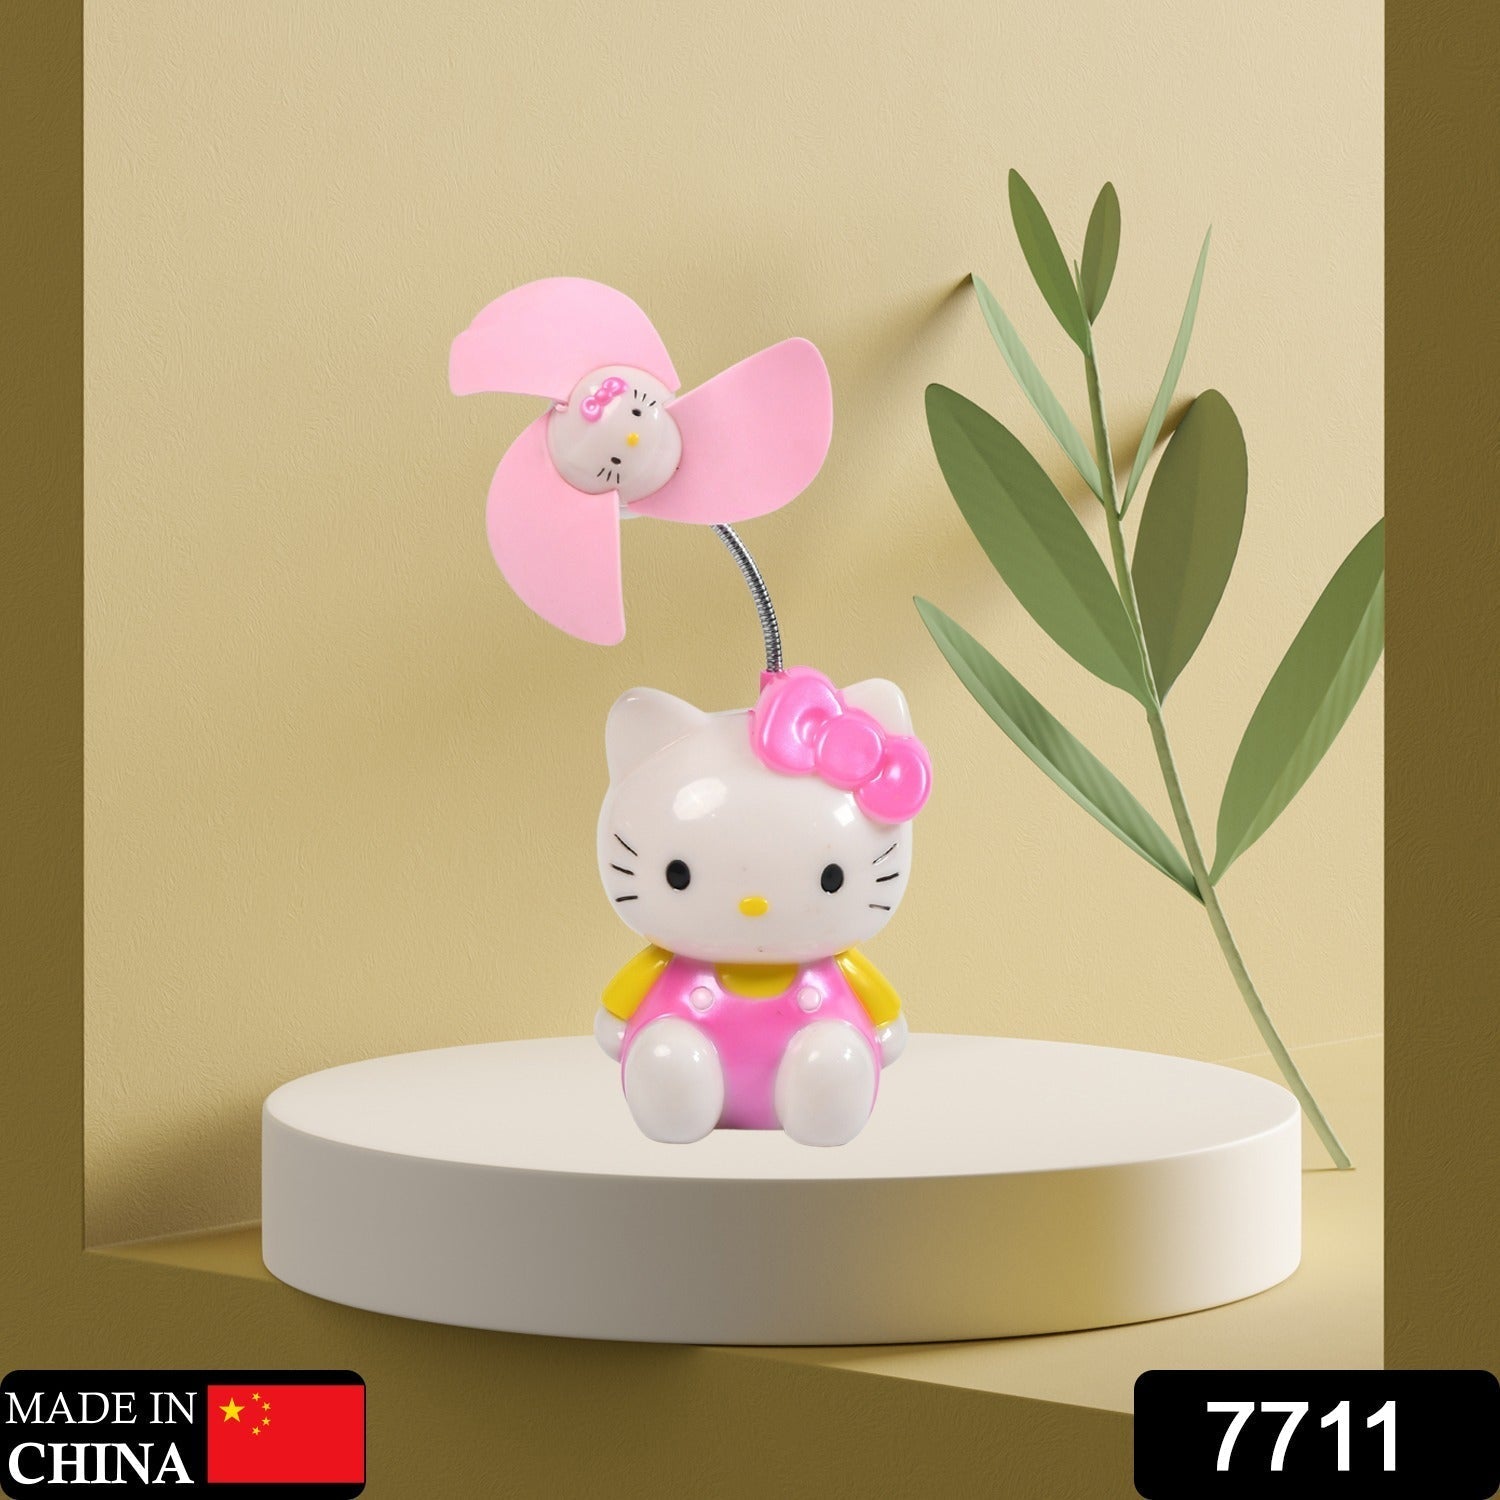 7711 Kitty USB Powered Portable USB Mini Cooling Fan Cooler Portable 